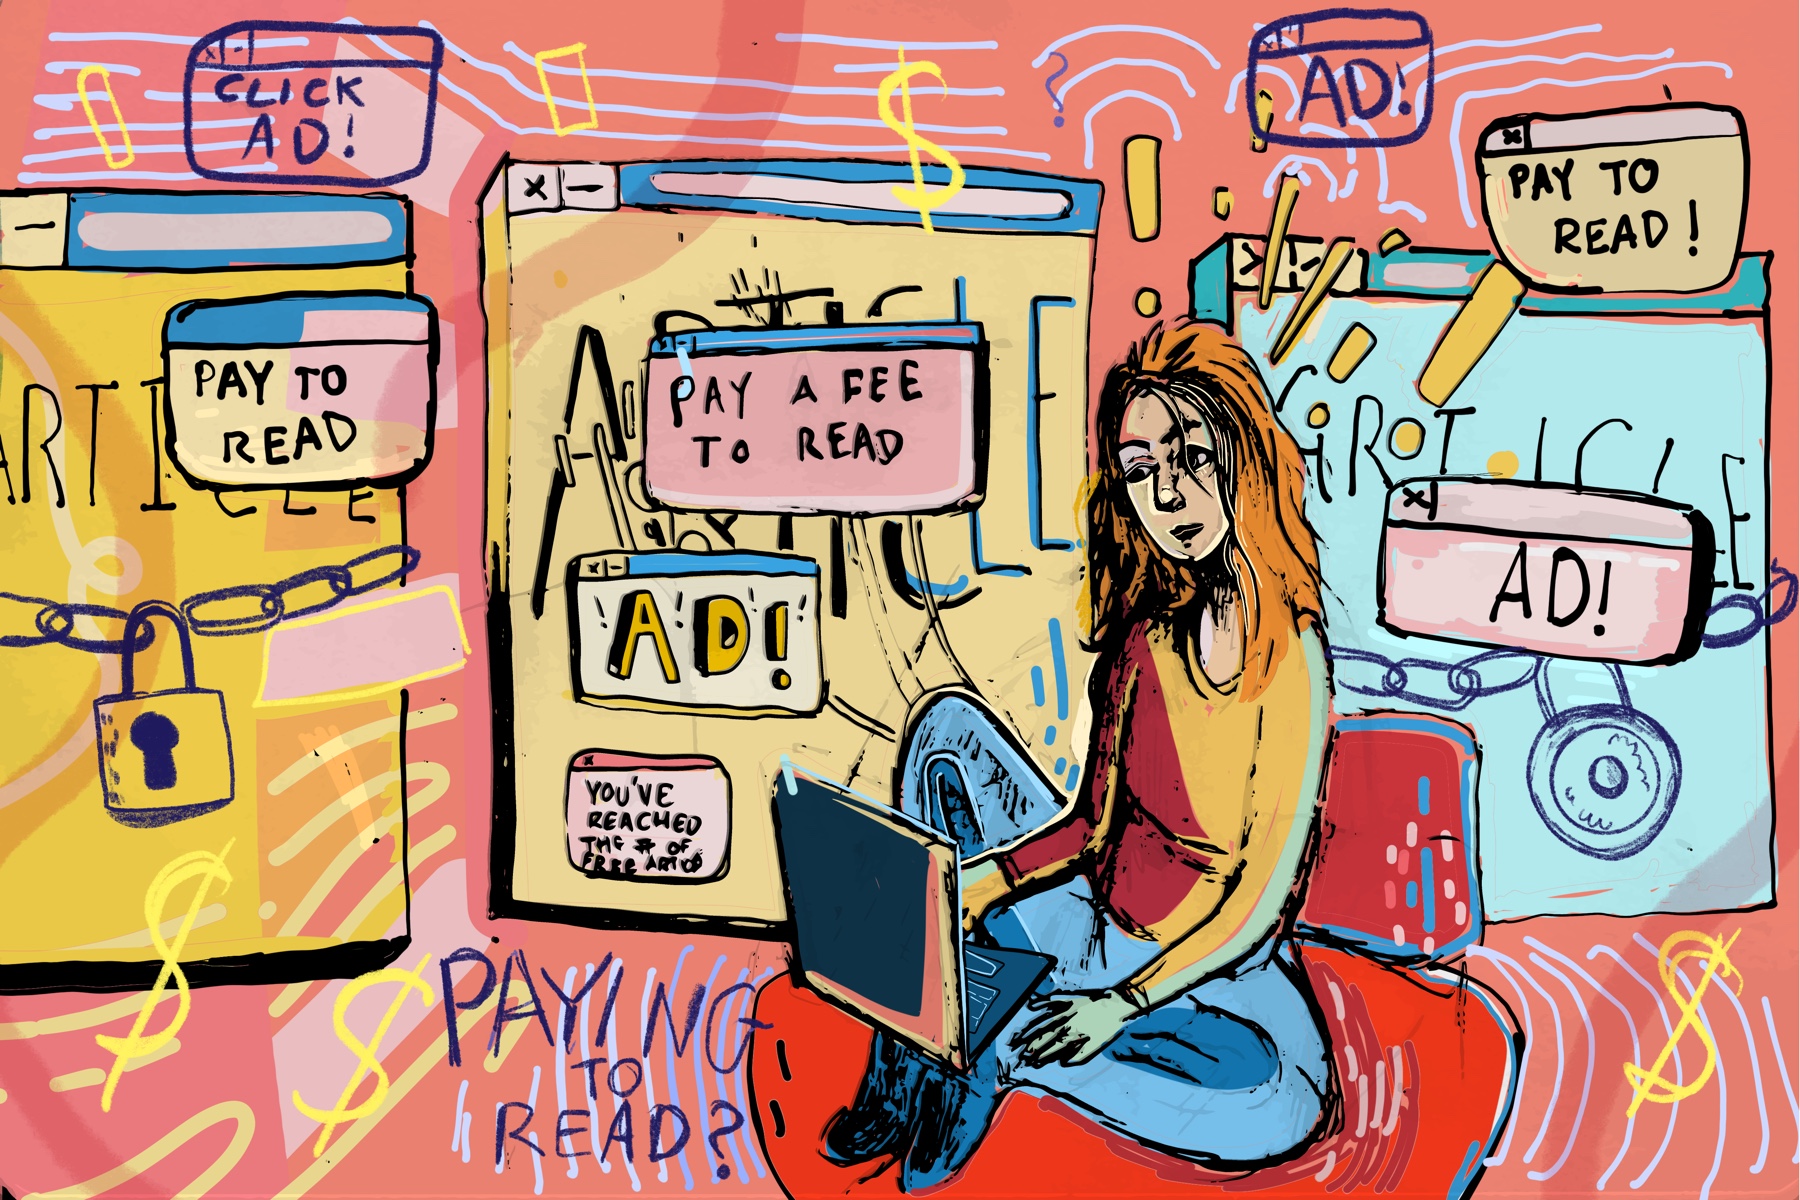 Some news organizations use advertisements and paywalls to generate income. [Graphic by Sara Mizannojehdehi]